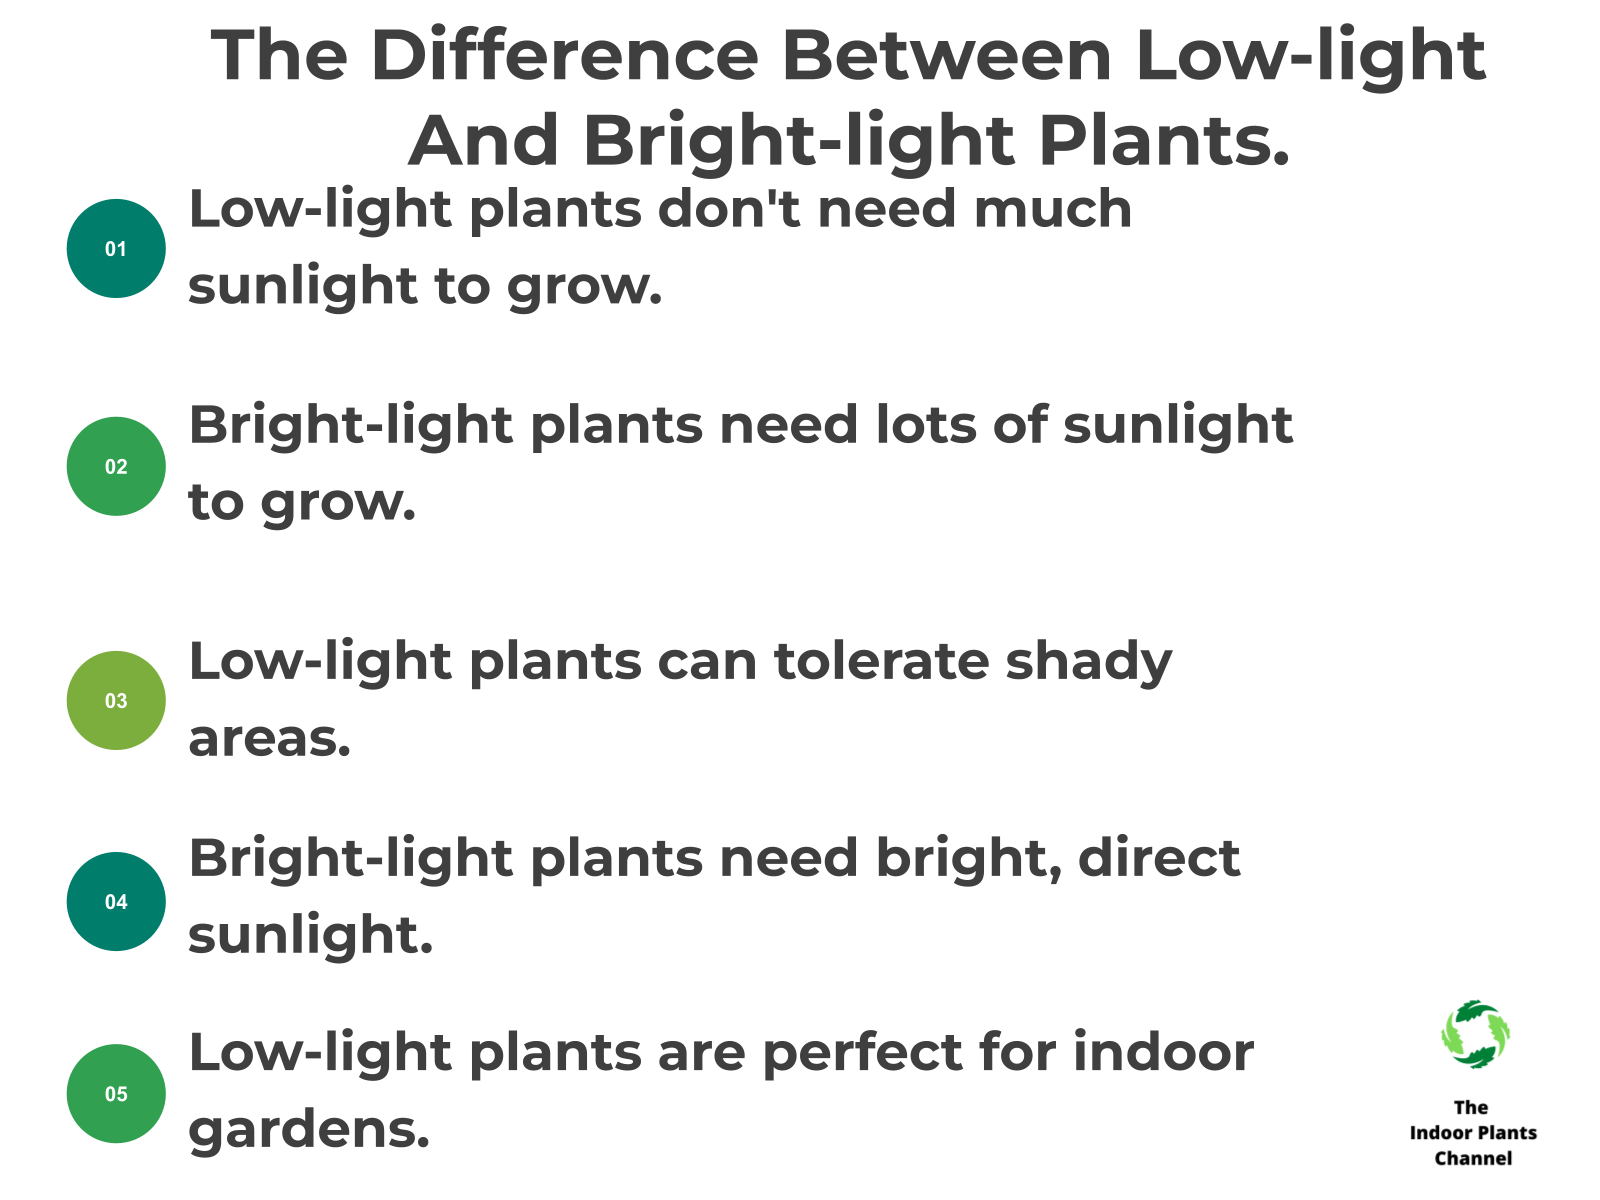 INFOGRAPHIC: The difference between low-light and bright-light plants.